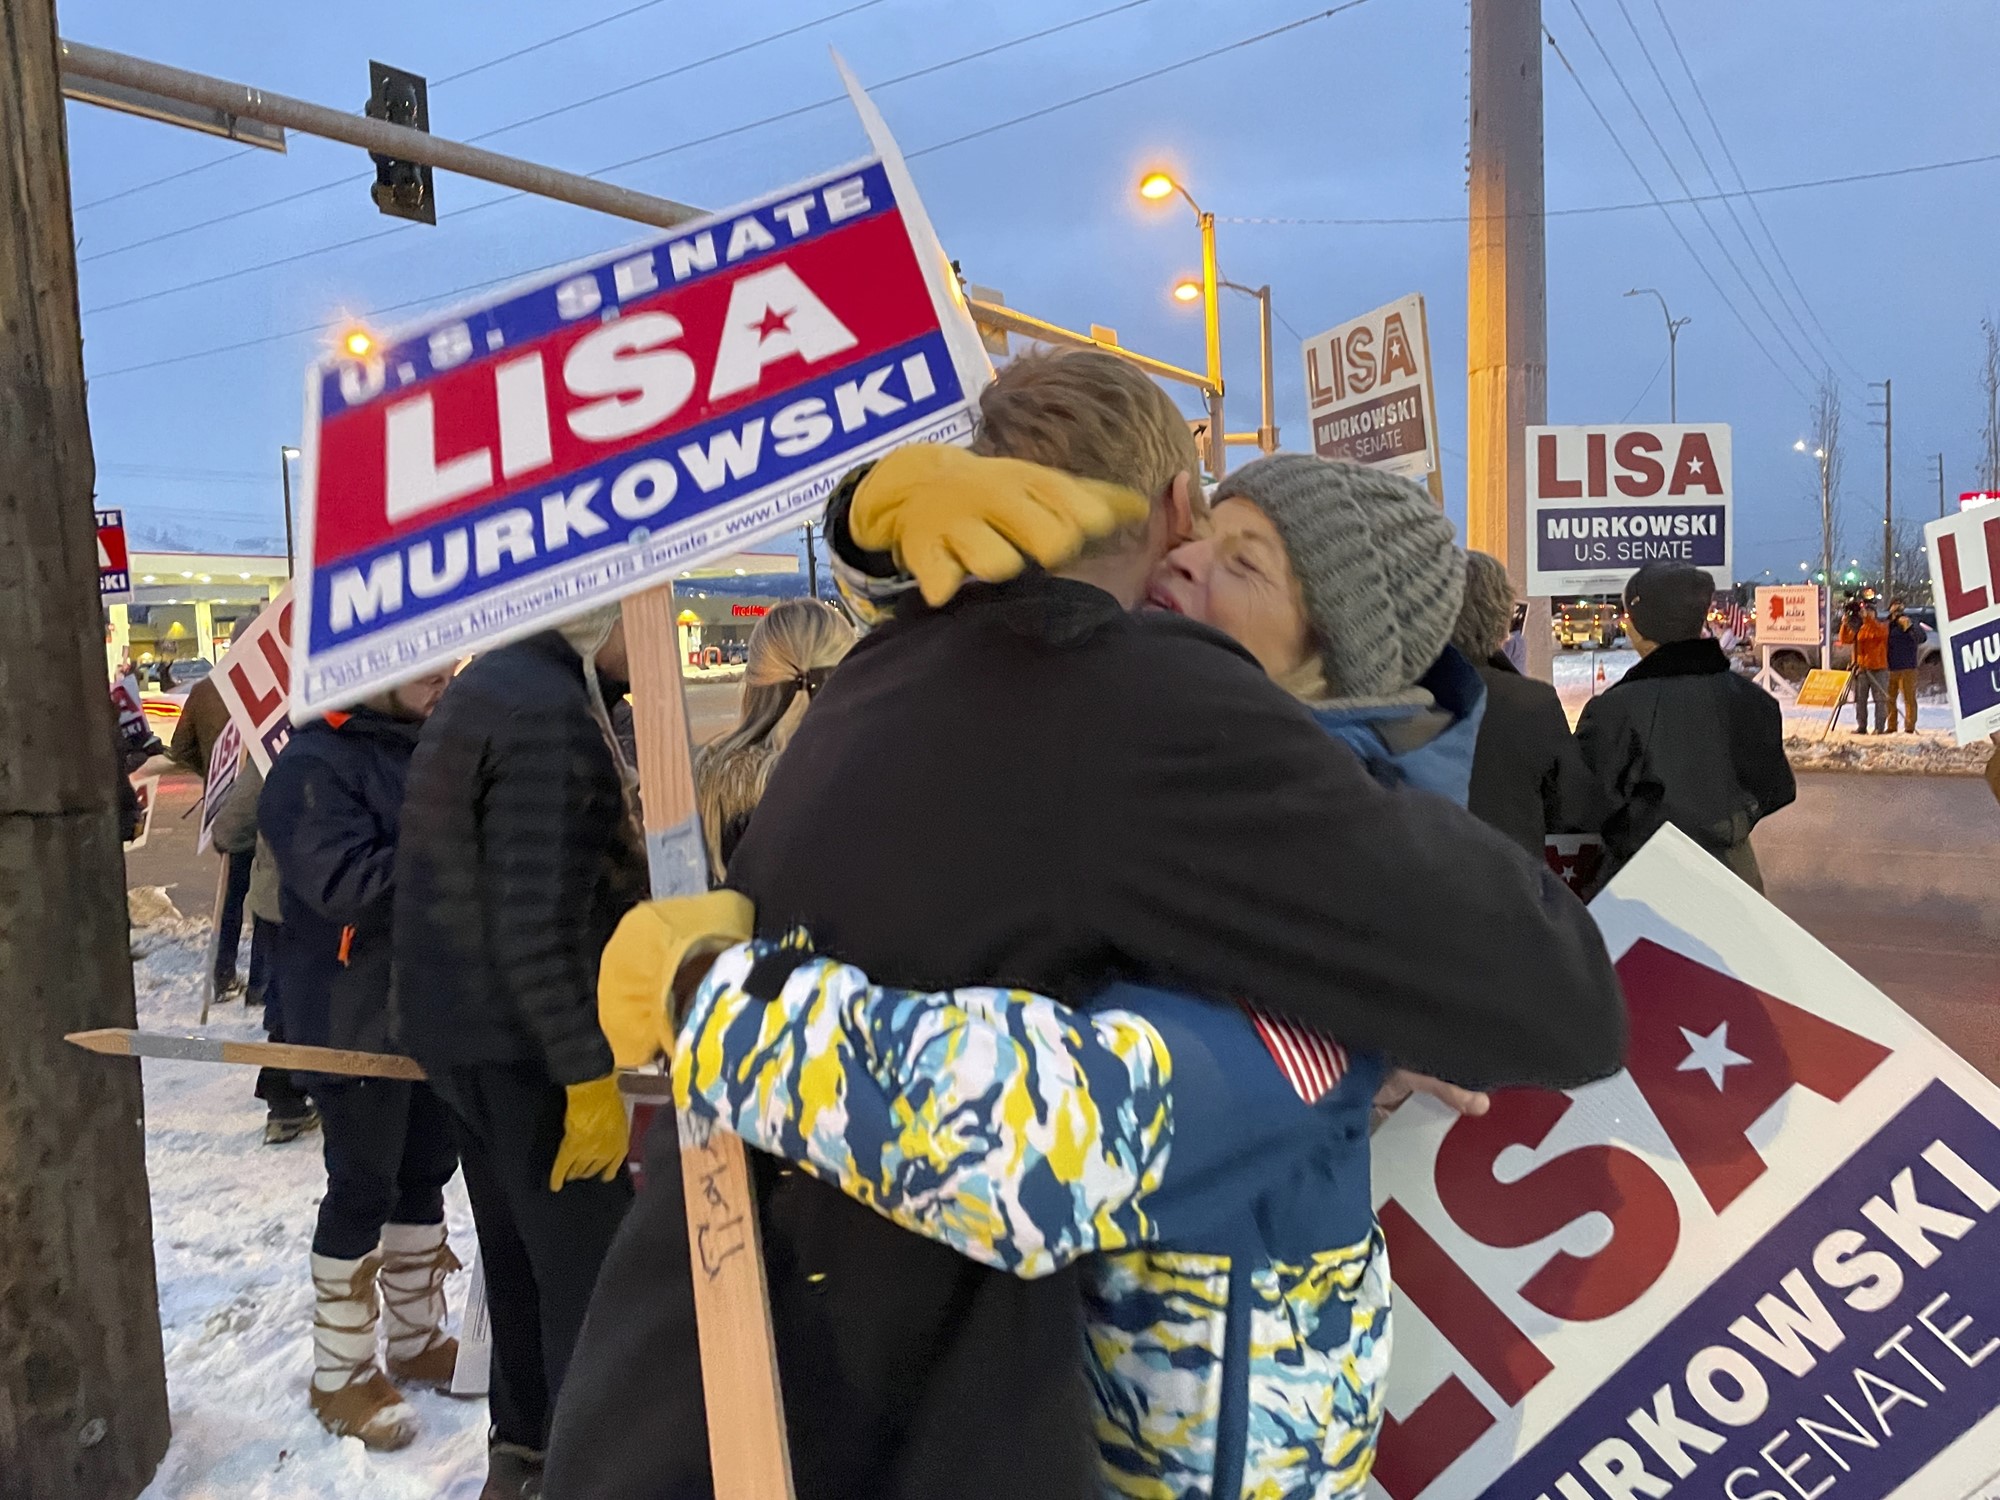 Lisa hugs her nephew while holding picket signs.